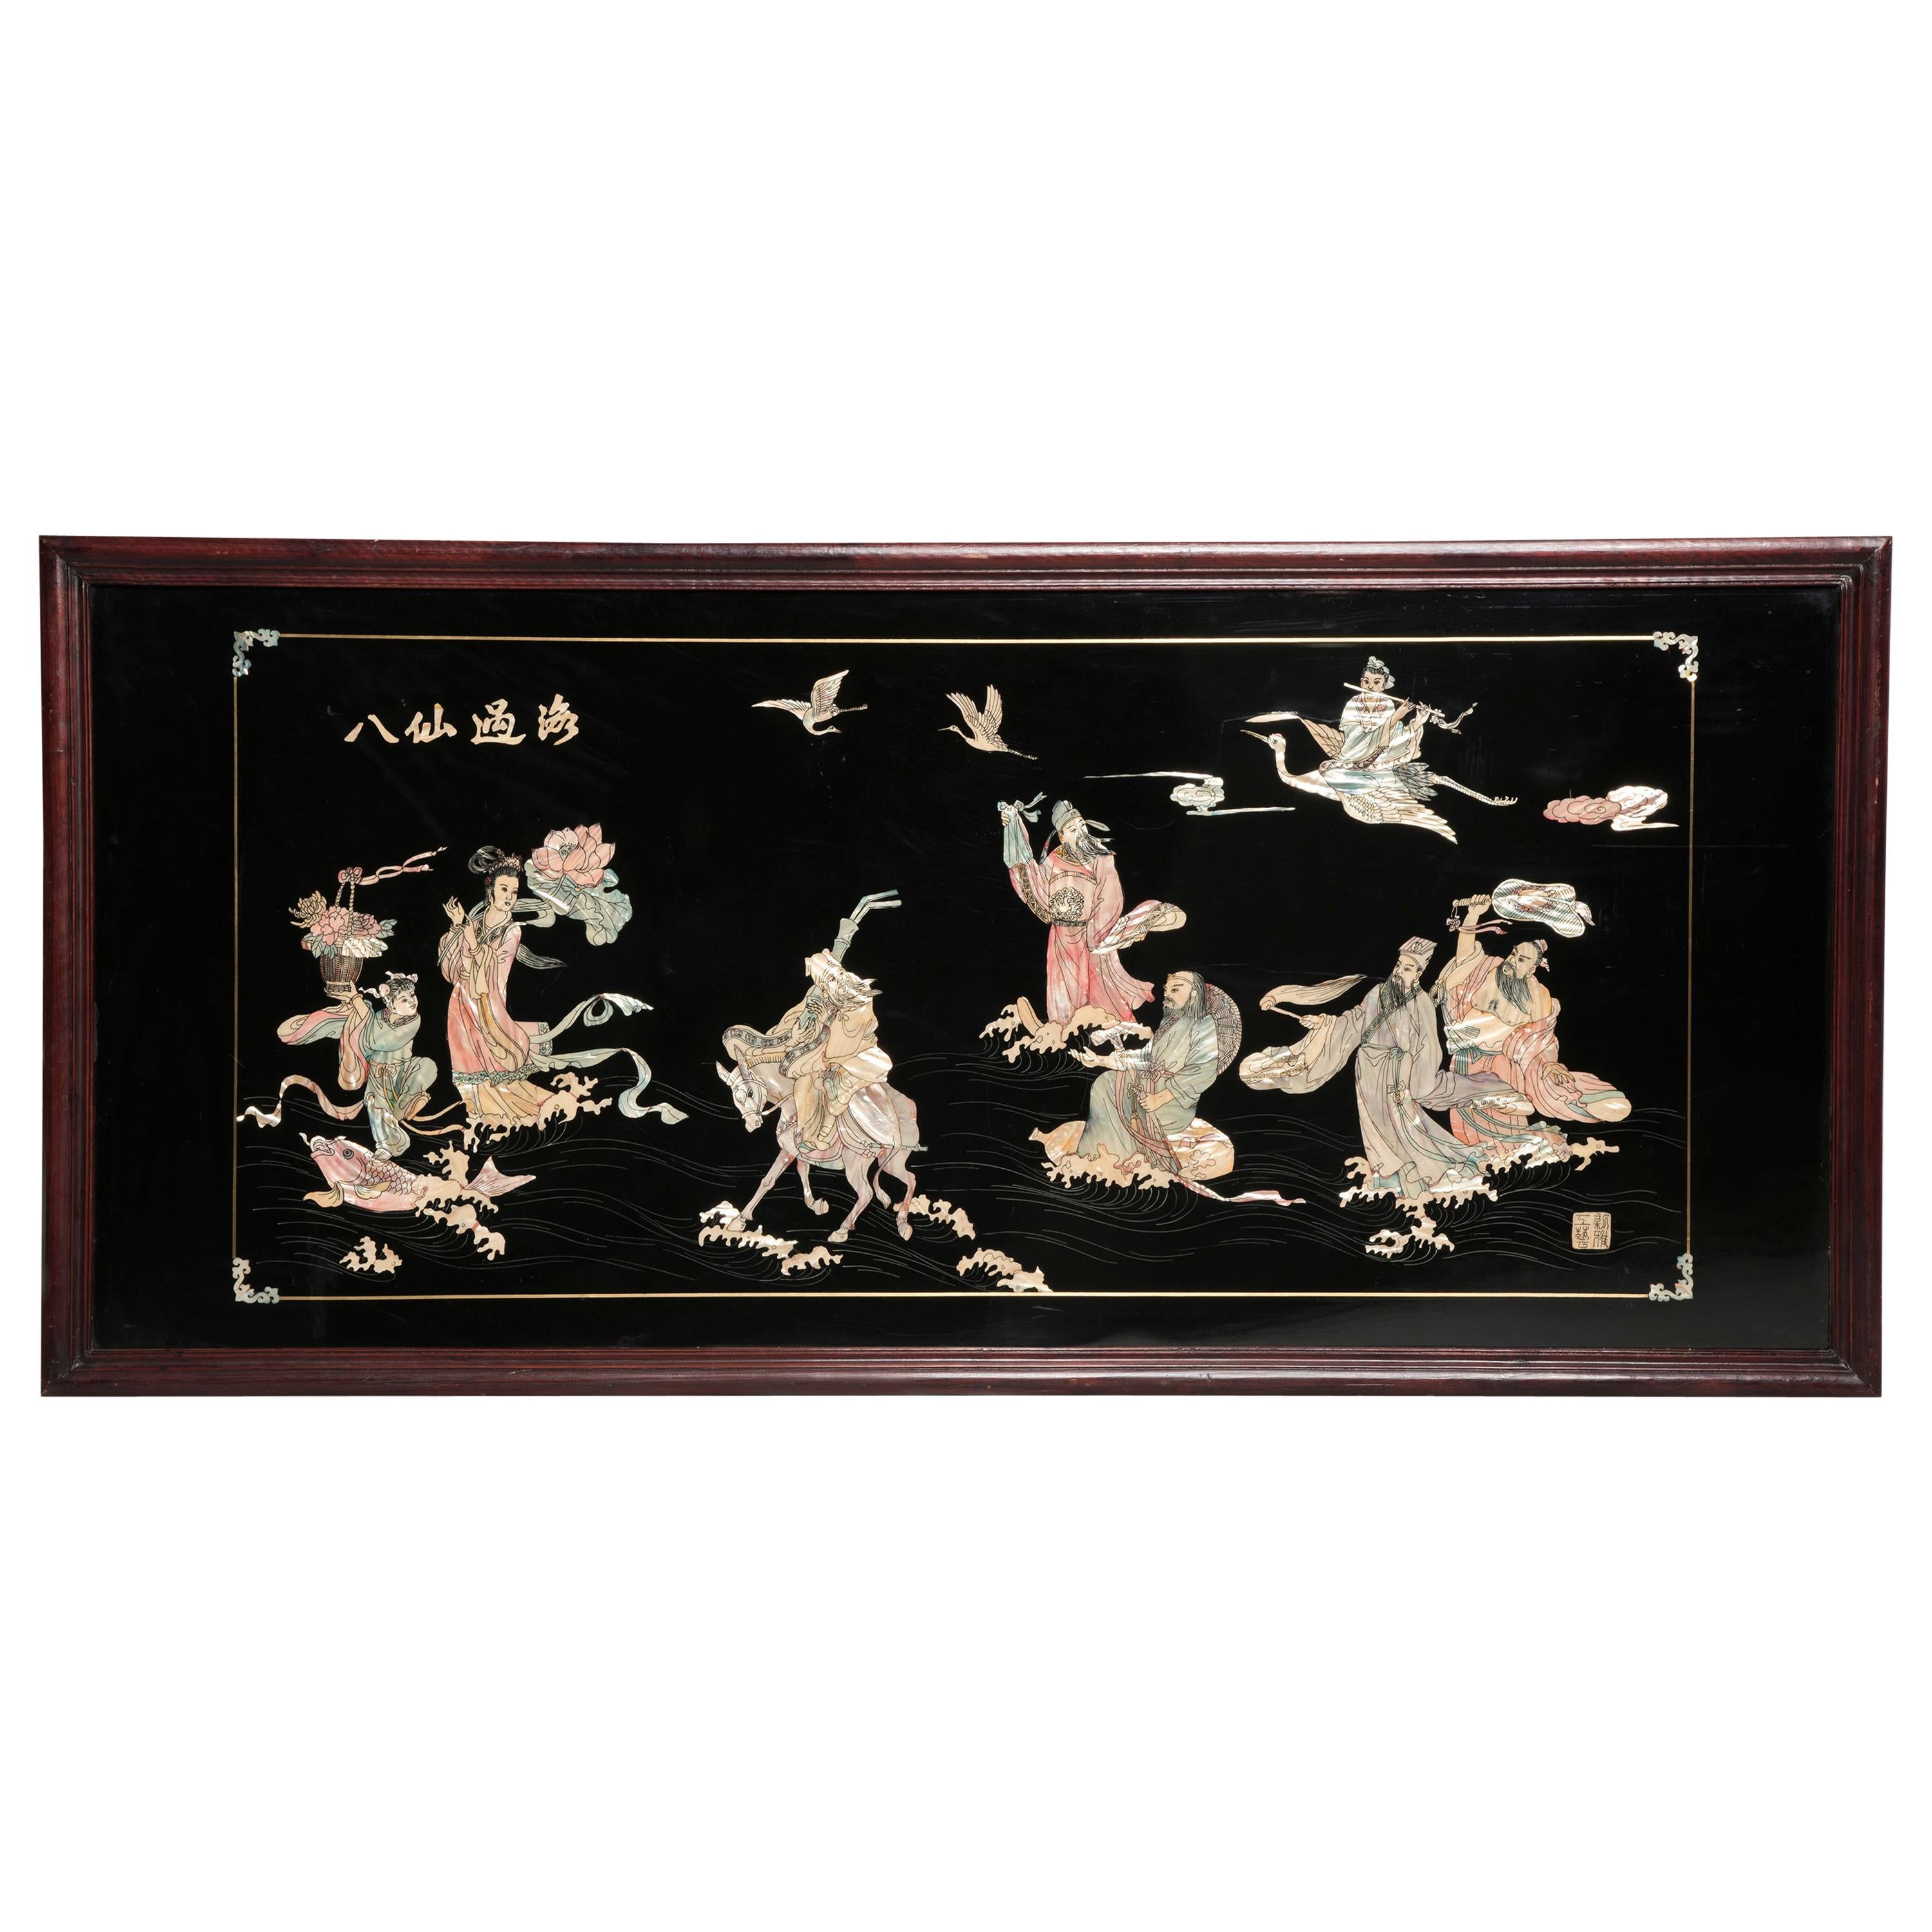 20th Century Mother of Pearl inlays Decorative Chinoiserie Panel